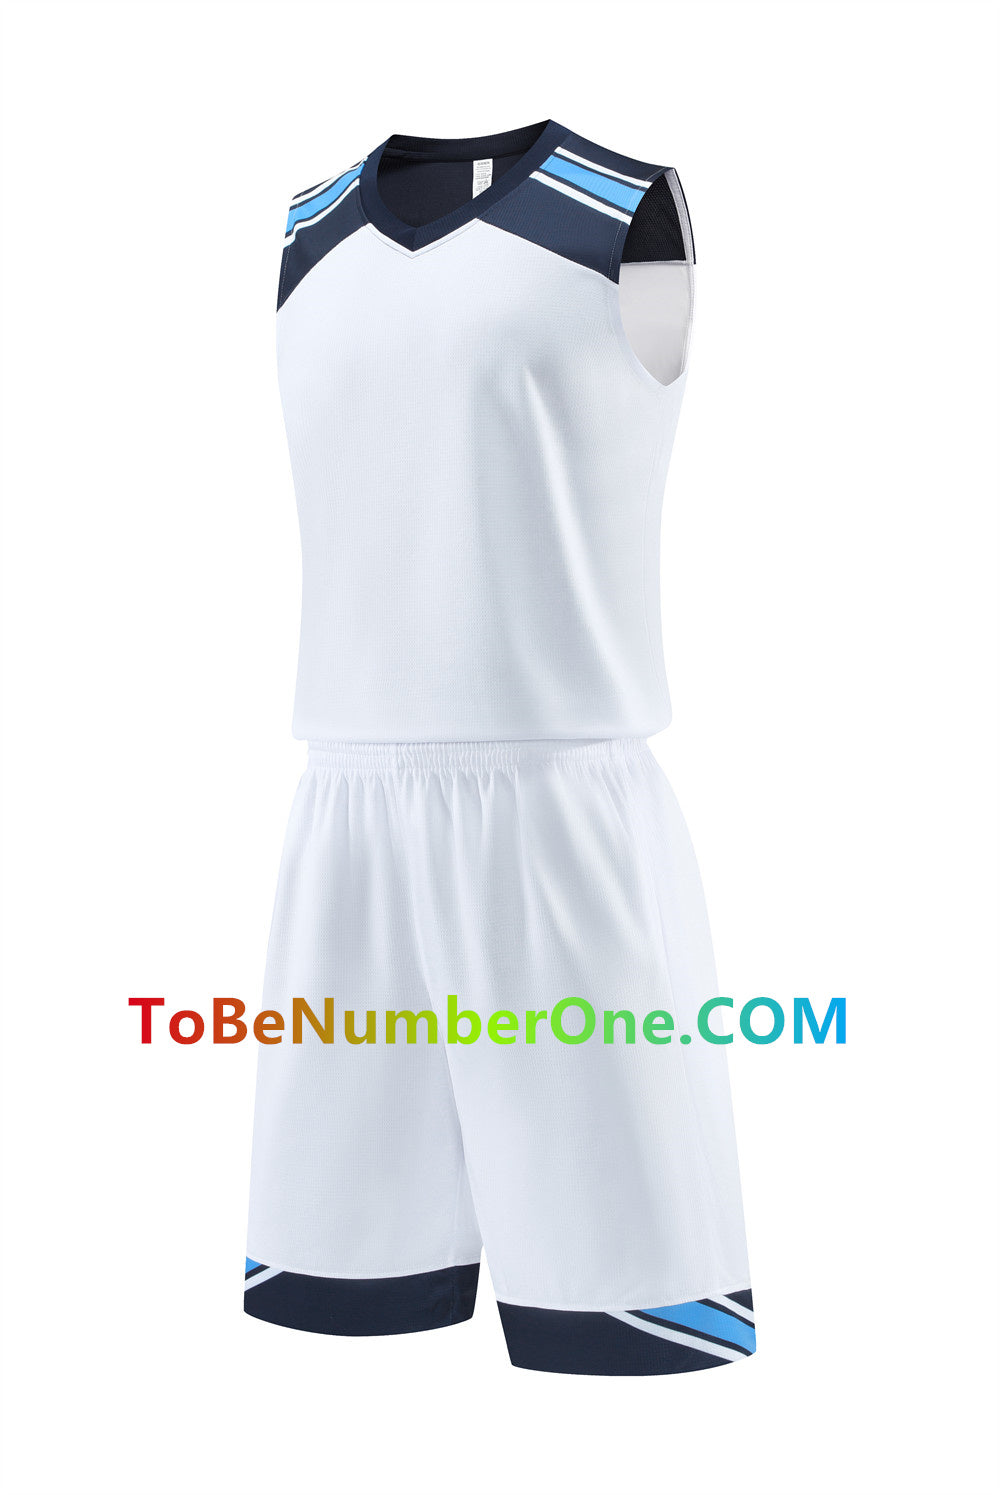 Customize instock High Quality Quick-drying basketball uniforms print with team name , player and number.  jerseys&shorts with pocket 603#